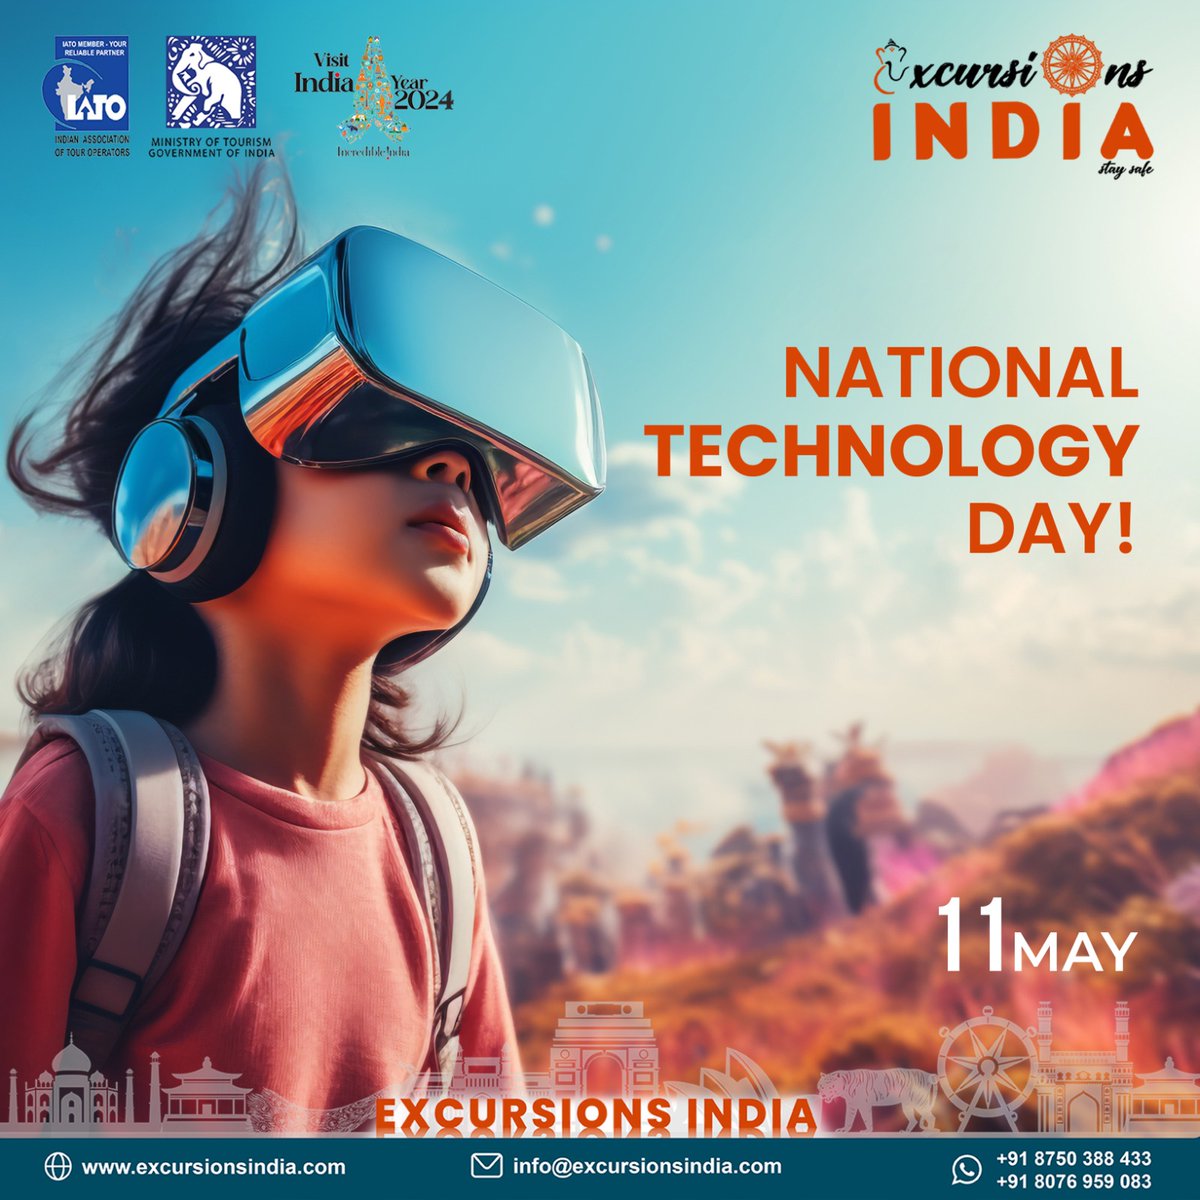 With every innovation, let's celebrate the future of India'
National Technology Day!
#excursions #excursionsindia #tours #indiatouristplaces #tourism #TechnologyDay #worldtechnologyday #technologysolutions #technologytheses #technologyinnovation #technologychallenges